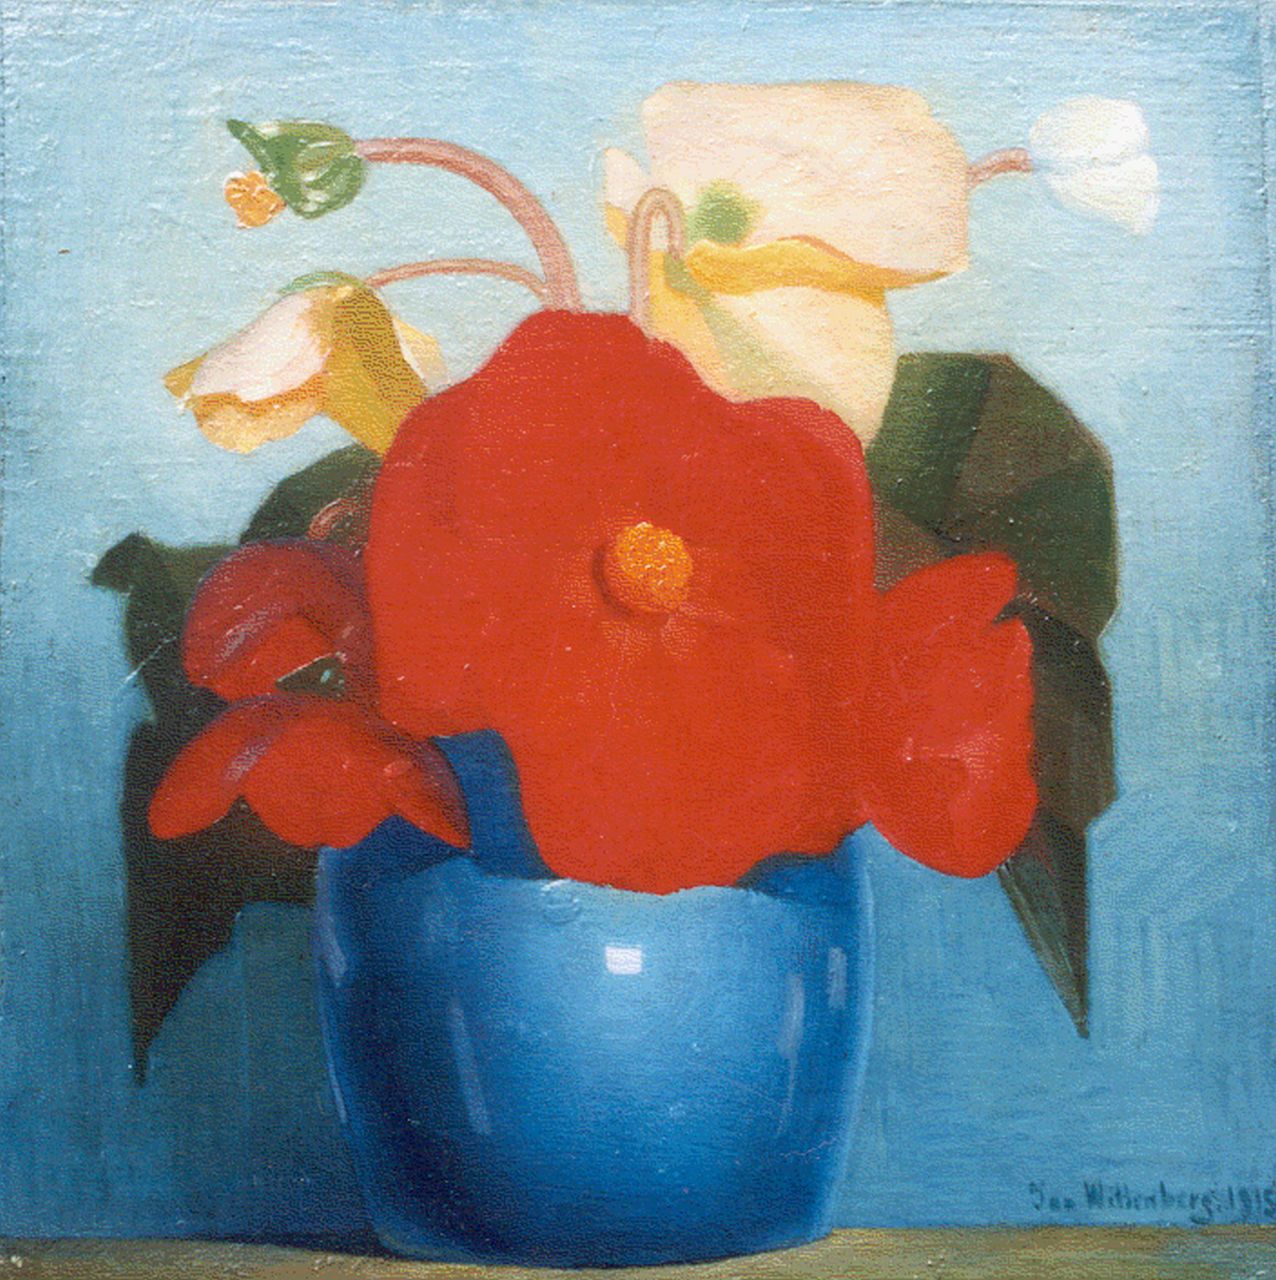 Wittenberg J.H.W.  | 'Jan' Hendrik Willem Wittenberg, A flower still life, oil on canvas laid down on panel 25.0 x 24.5 cm, signed l.r. and dated 1915